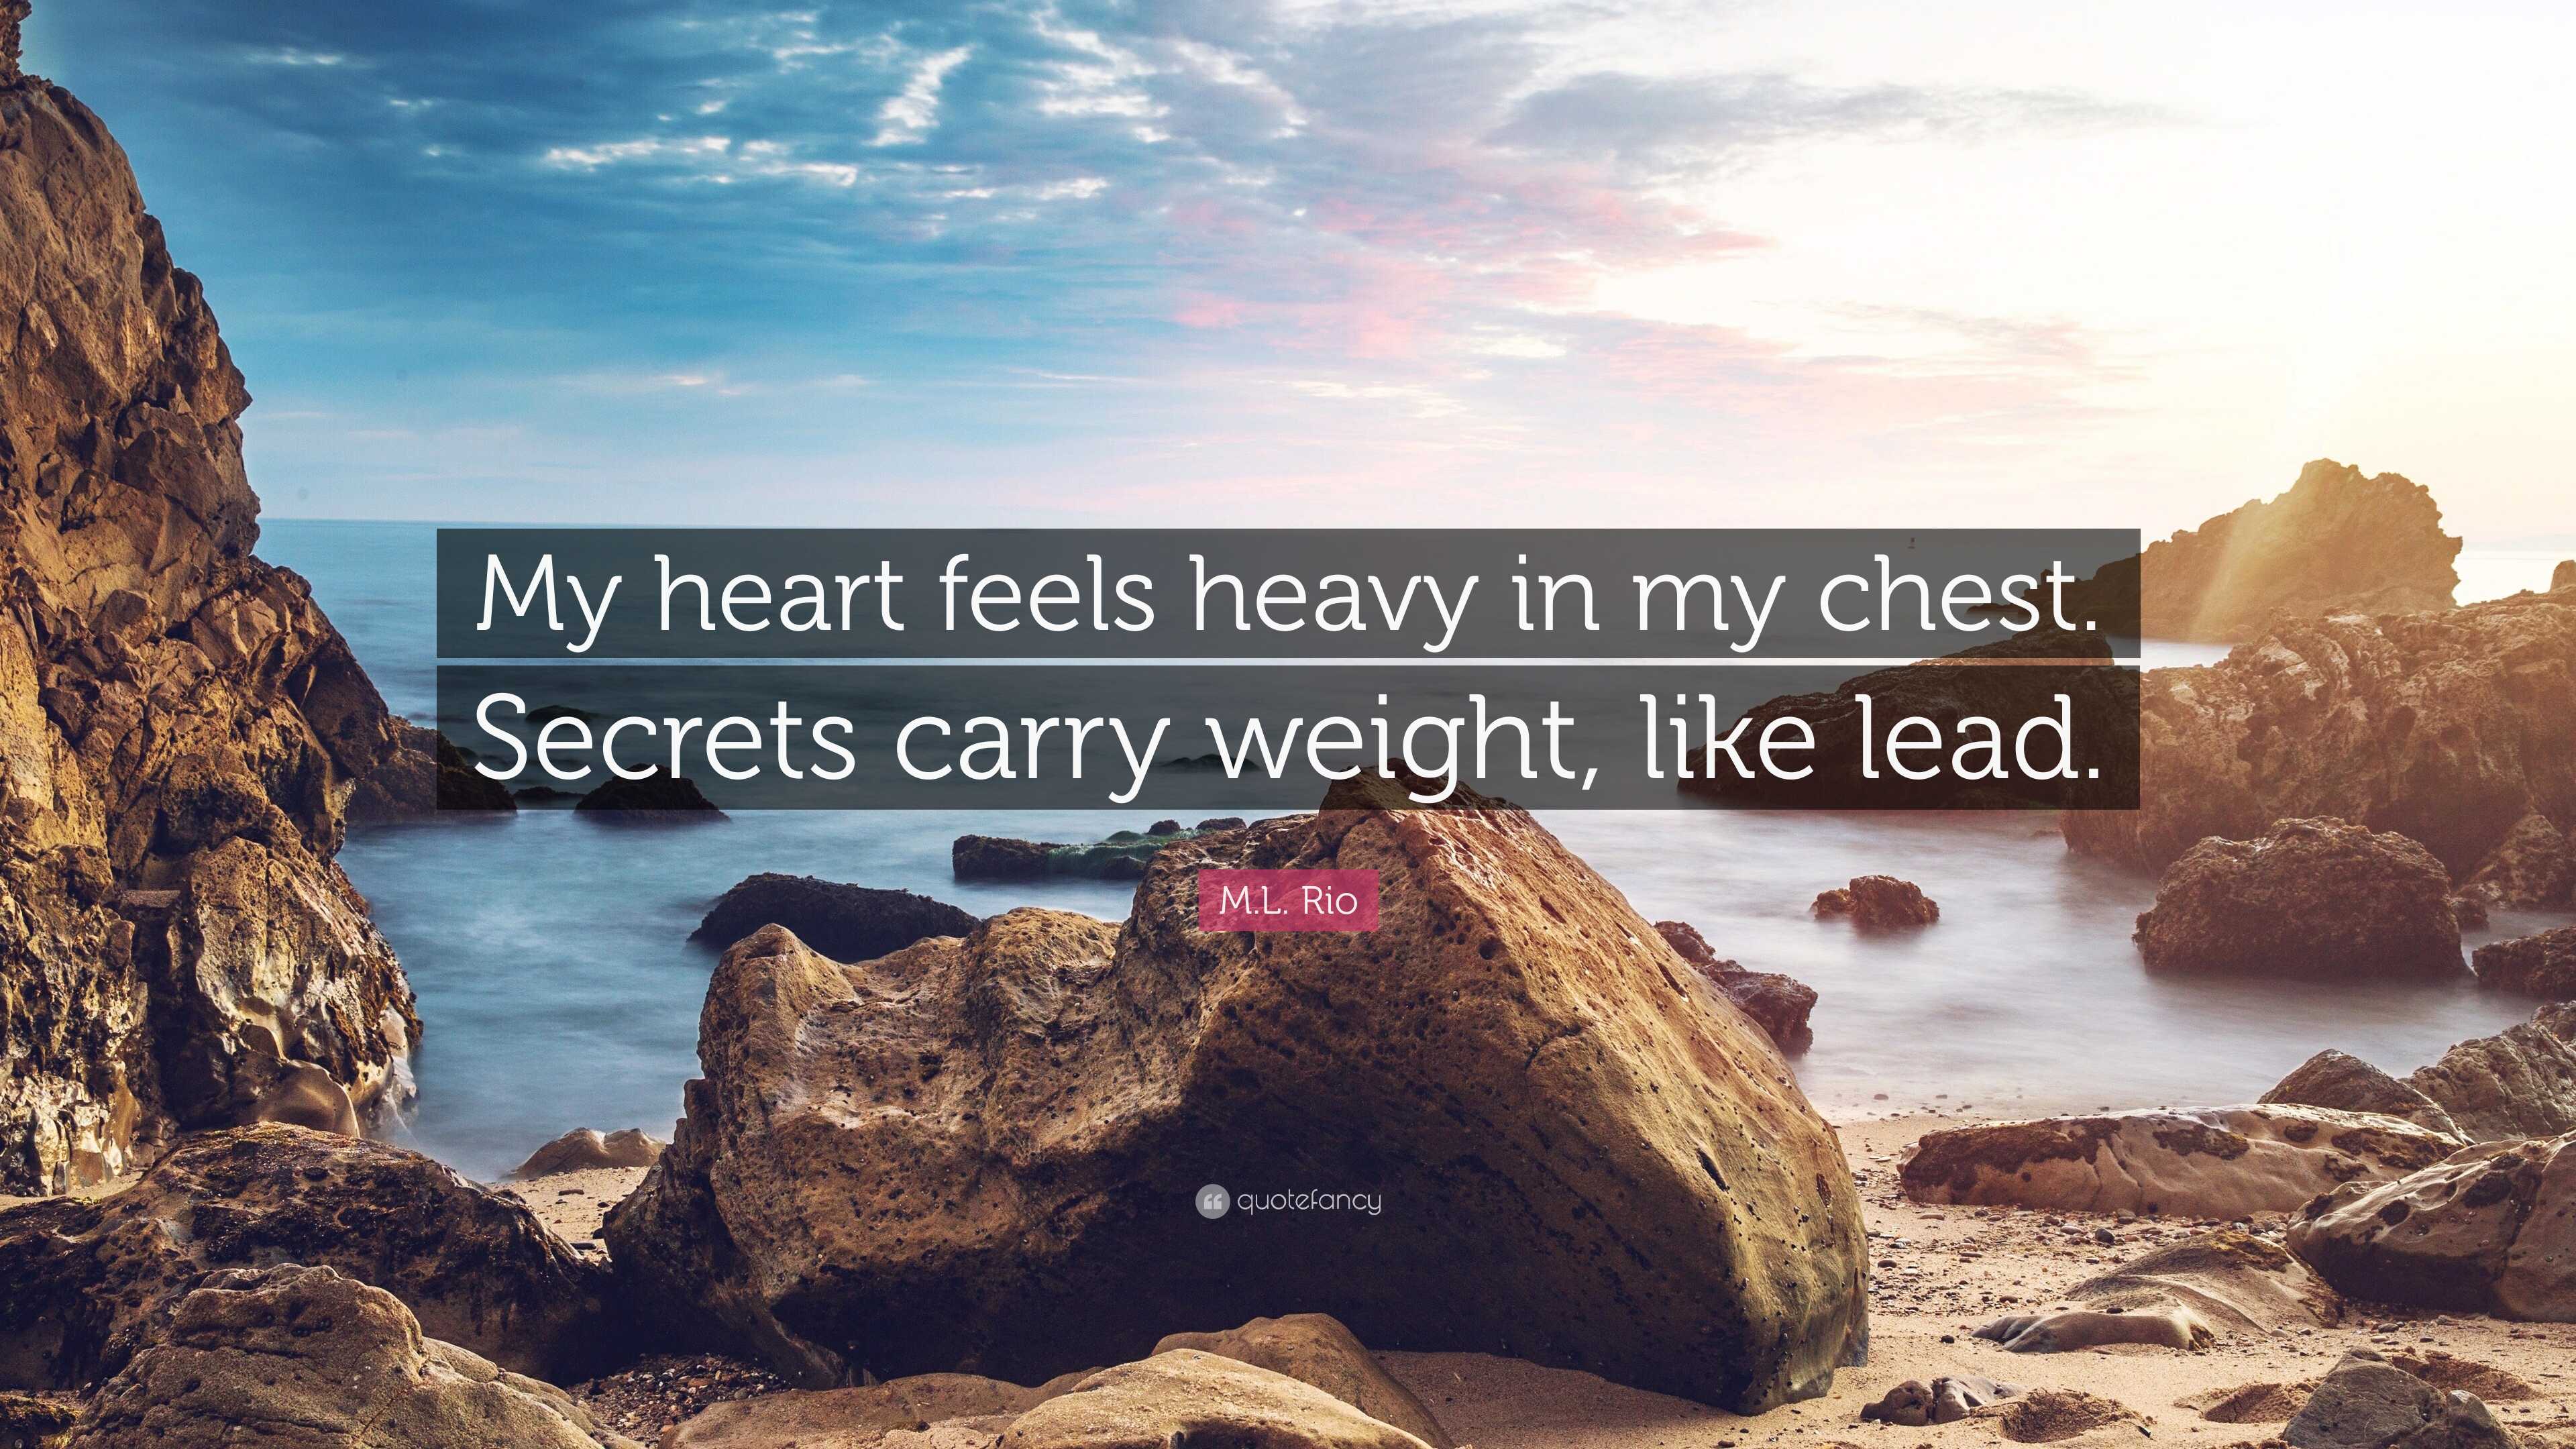 M.L. Rio Quote: “My heart feels heavy in my chest. Secrets carry weight,  like lead.”